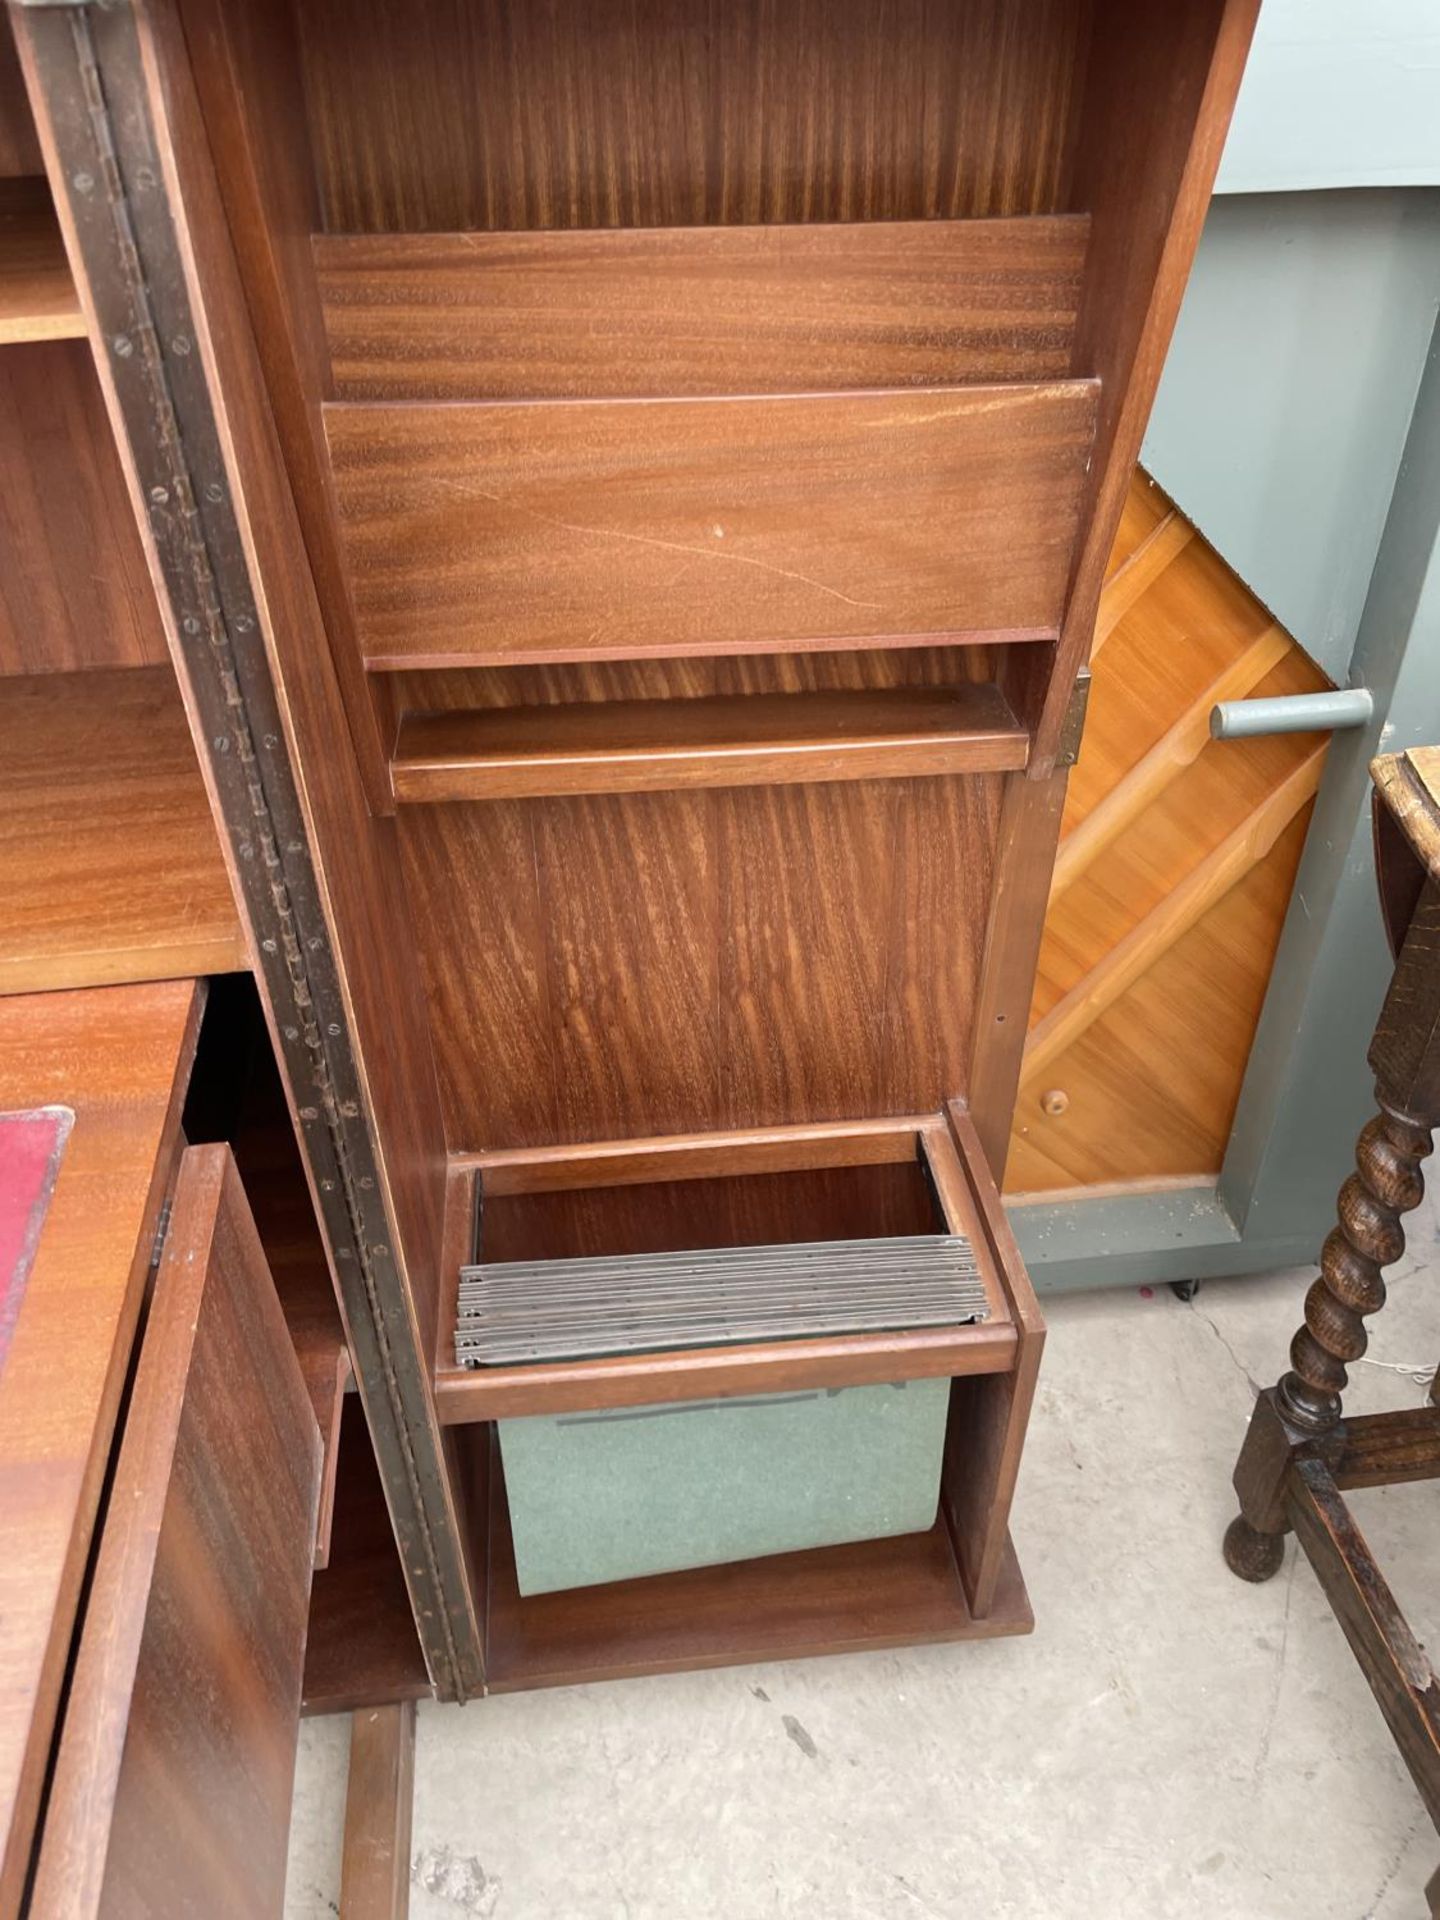 A RETRO TEAK 'HOME OFFICE' BY NEWCRAFT LTD WITH FOLDING DOORS AND PULL-OUT SECTIONS - Image 4 of 7